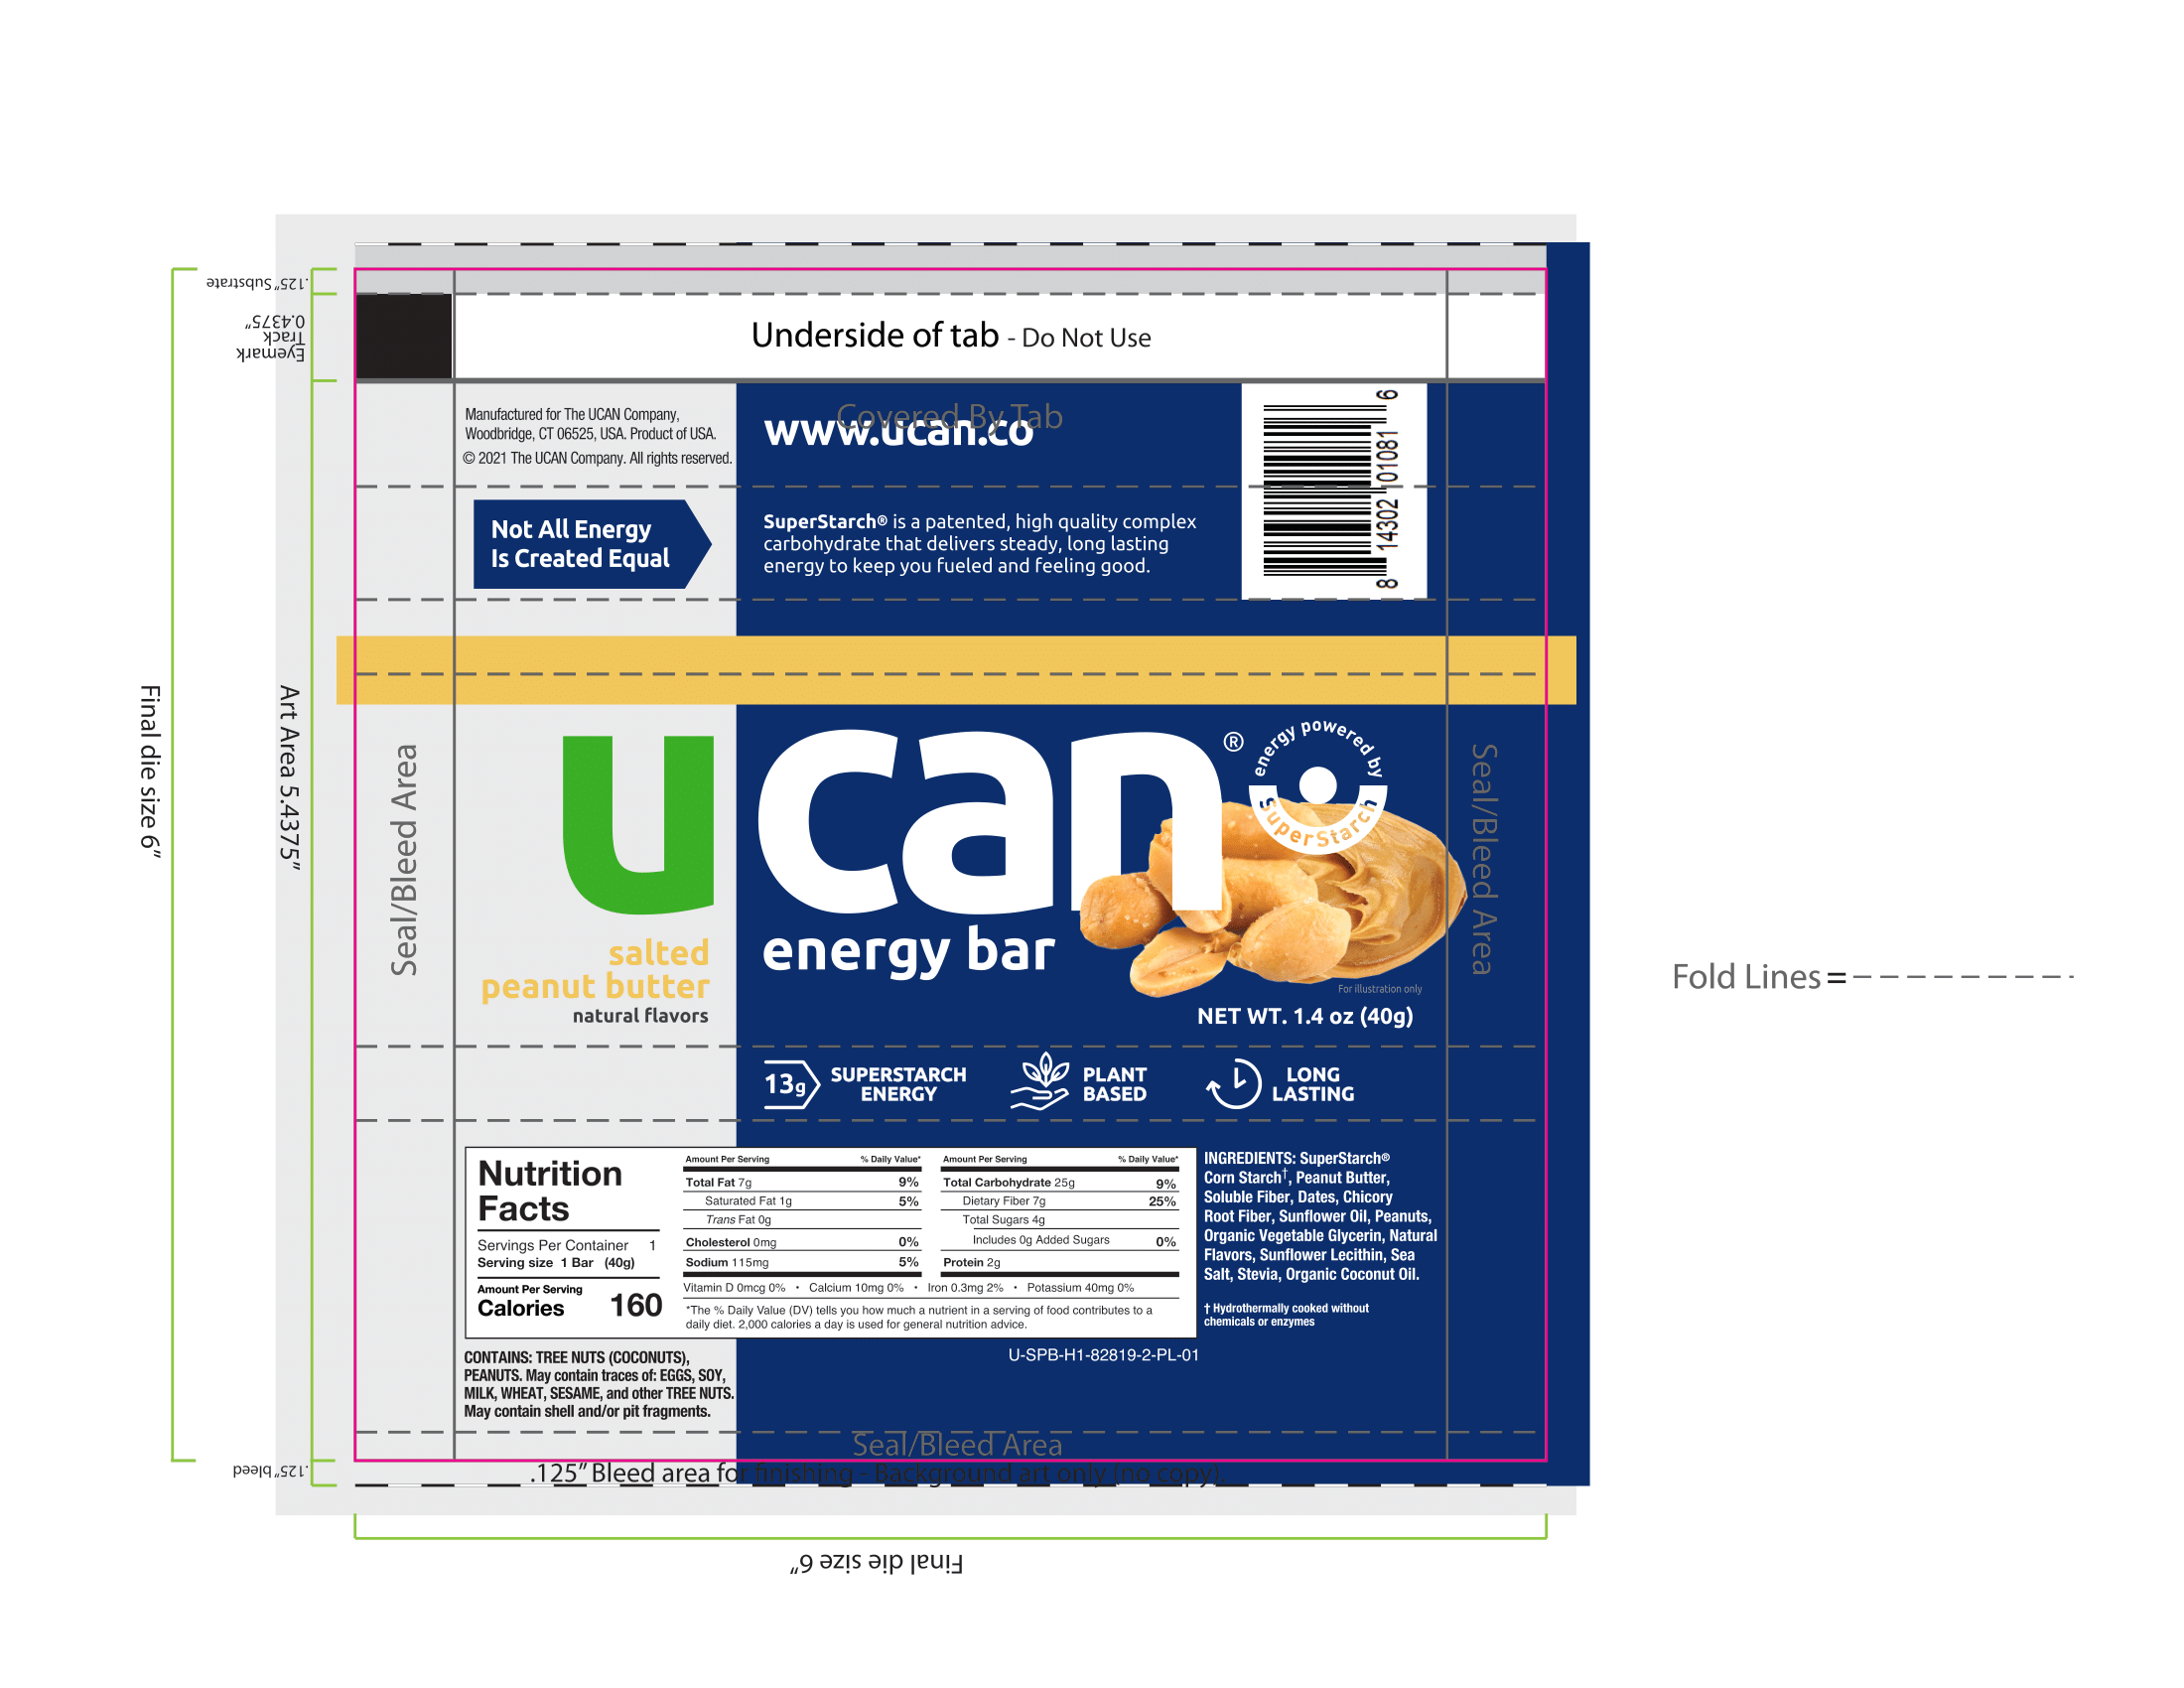 UCAN Snack Bar Box - Salted Peanut Butter 6 innerpacks per case 1.1 lbs Product Label